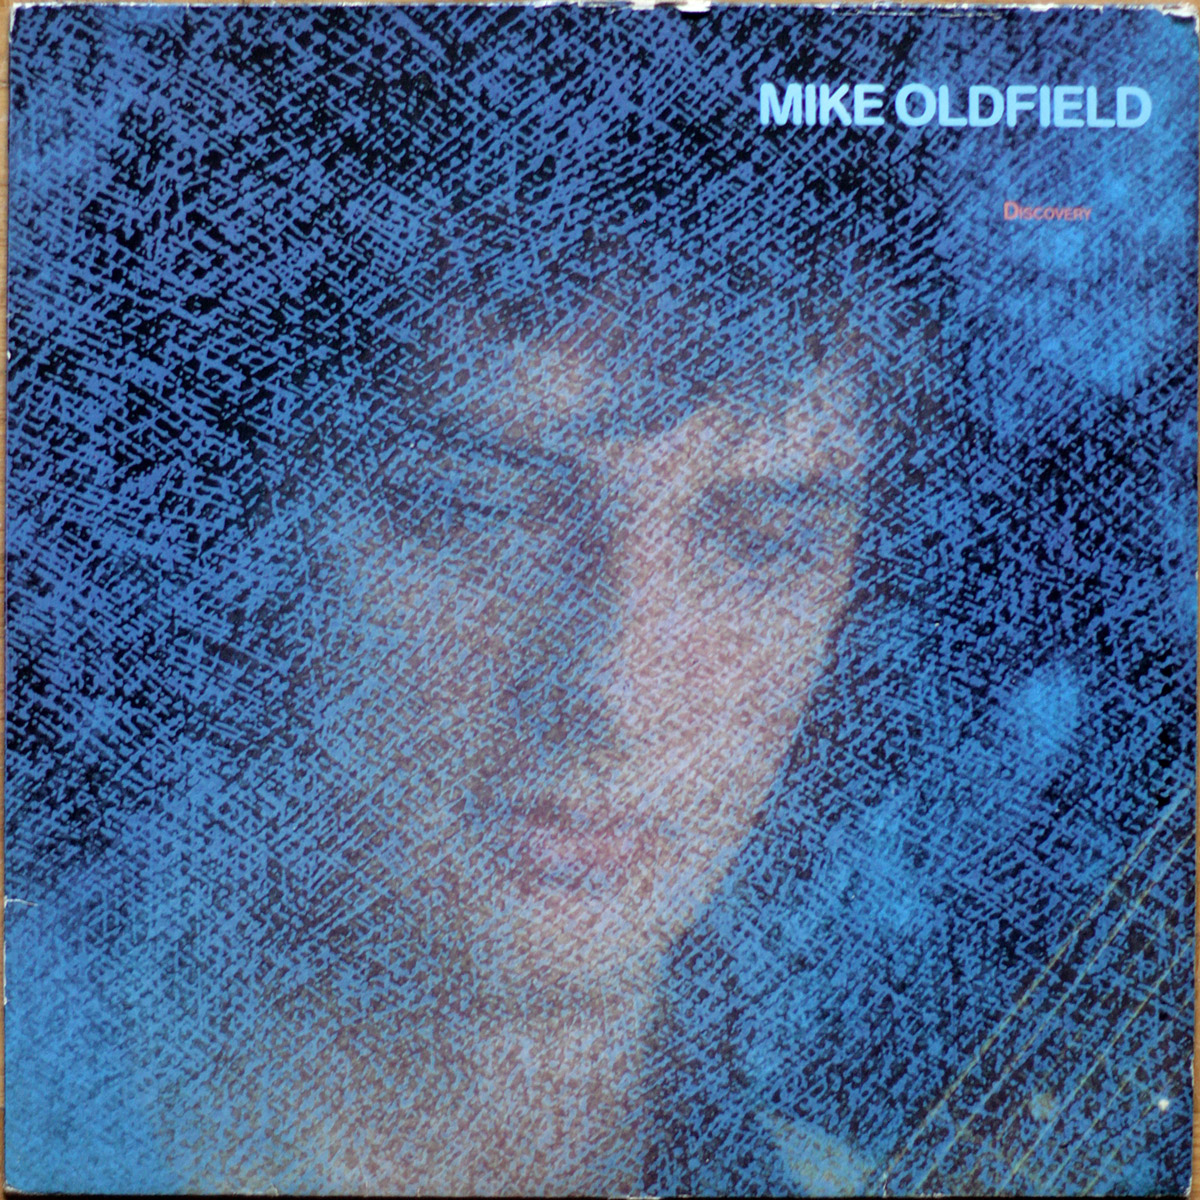 Mike Oldfield • Discovery and the lake • Virgin 70 259 • Simon Phillips • Barry Palmer